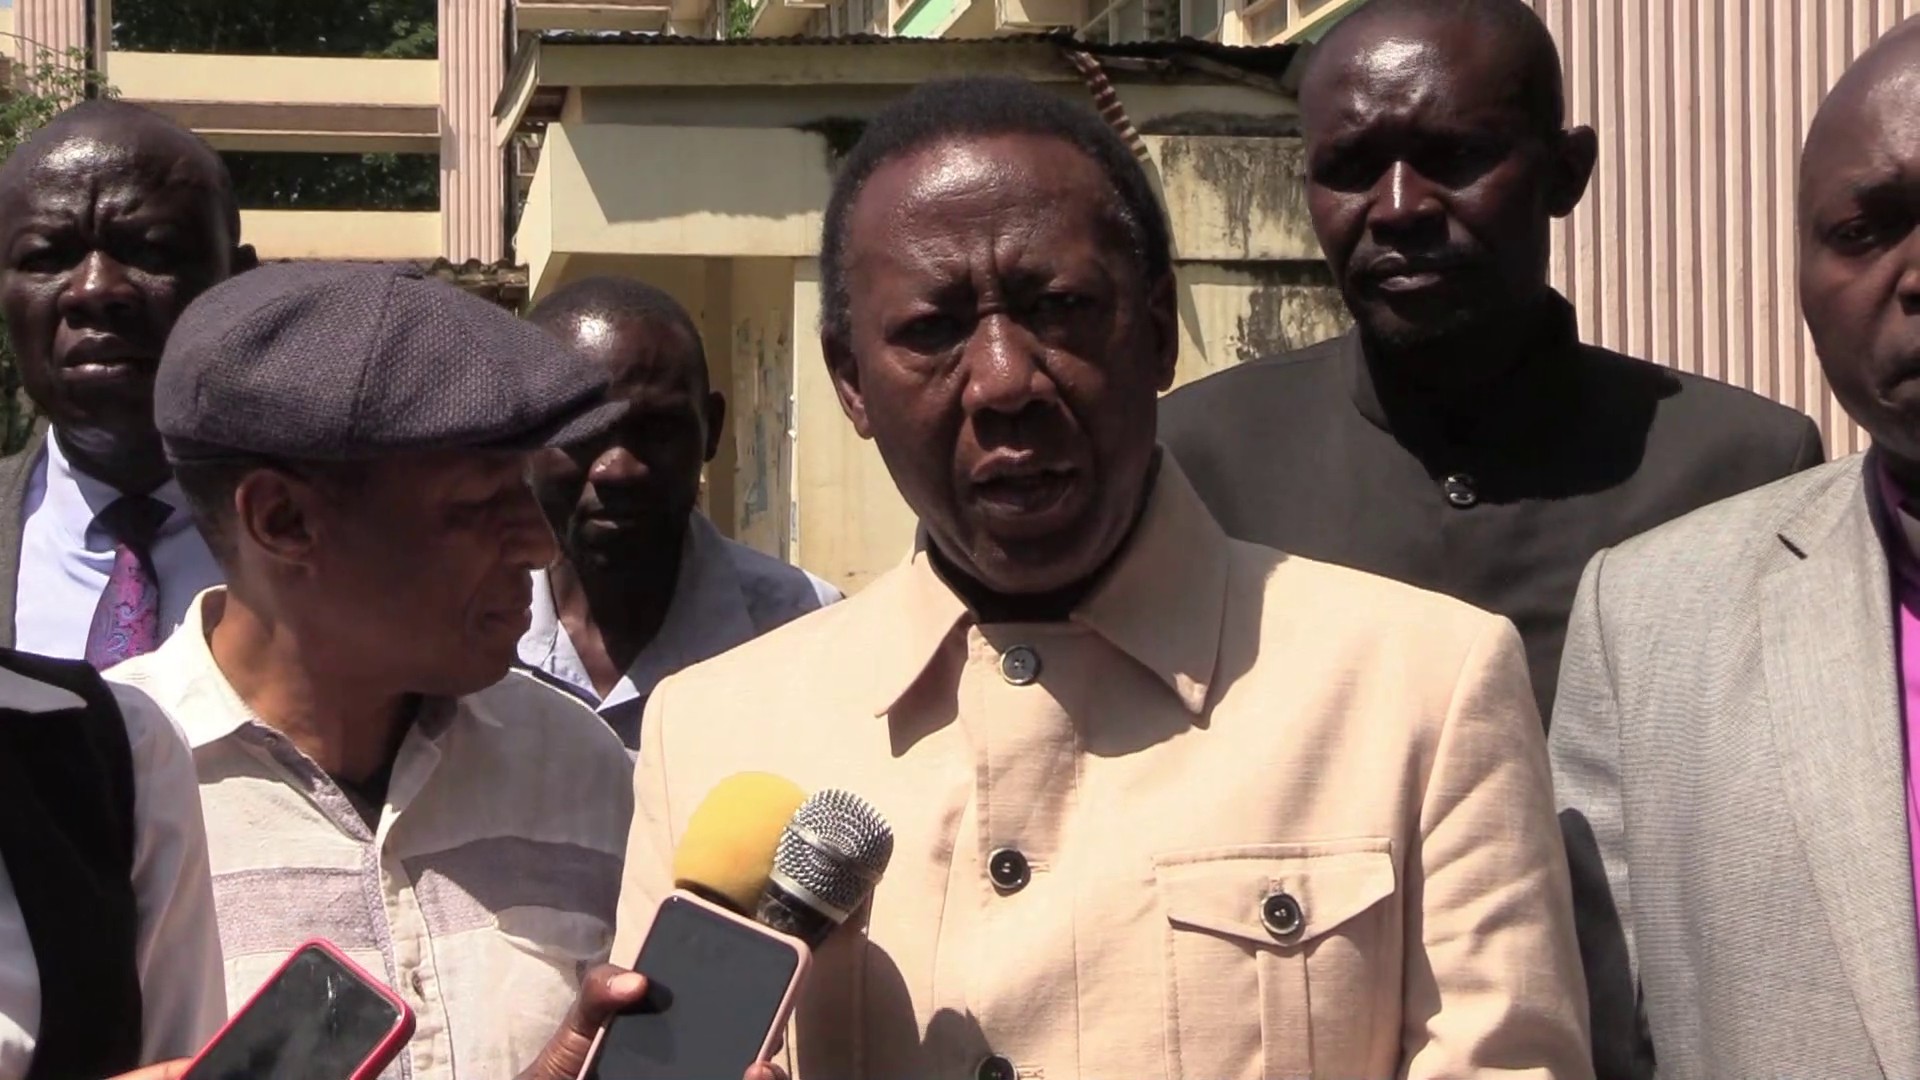 Kenyans assured of an end to religious extremism, radicalization